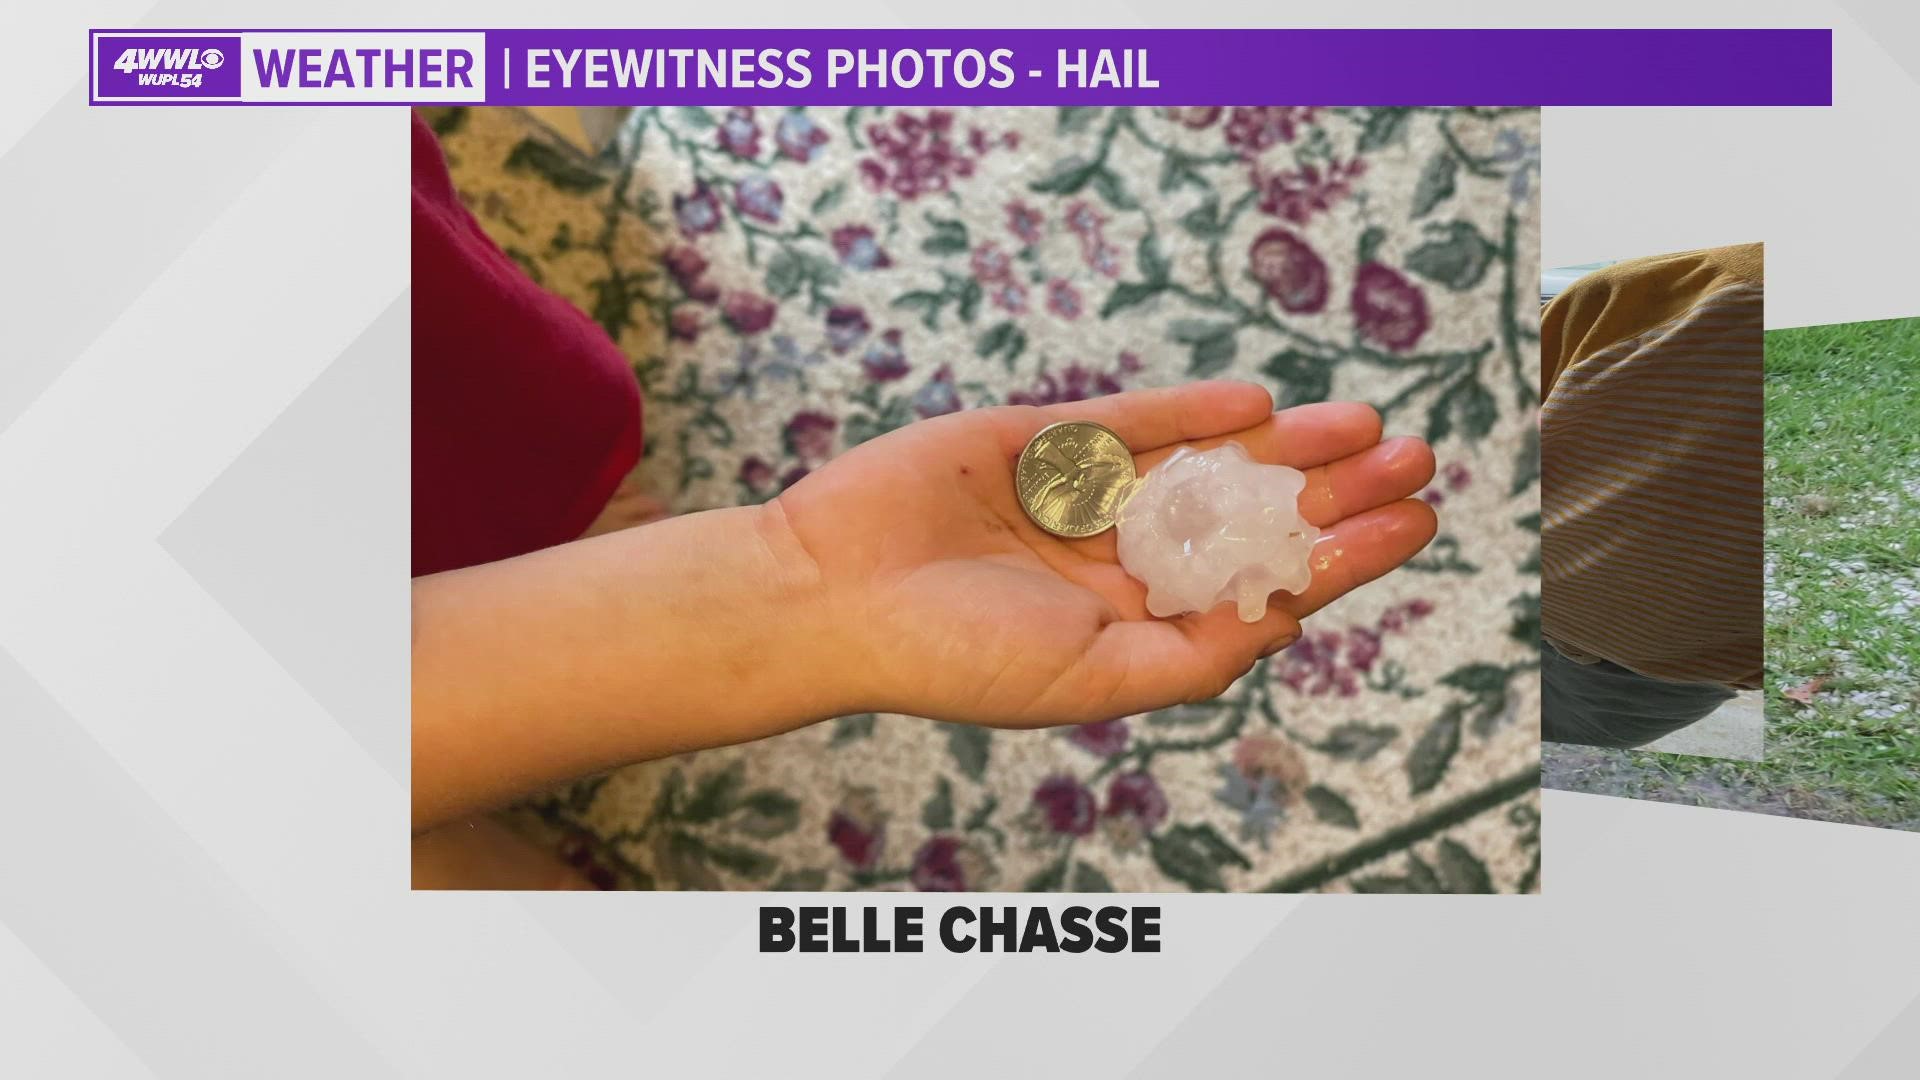 A severe thunderstorm brought heavy rain, high winds and some sizeable hail to parts of the west bank, most of it in Belle Chasse Sunday.